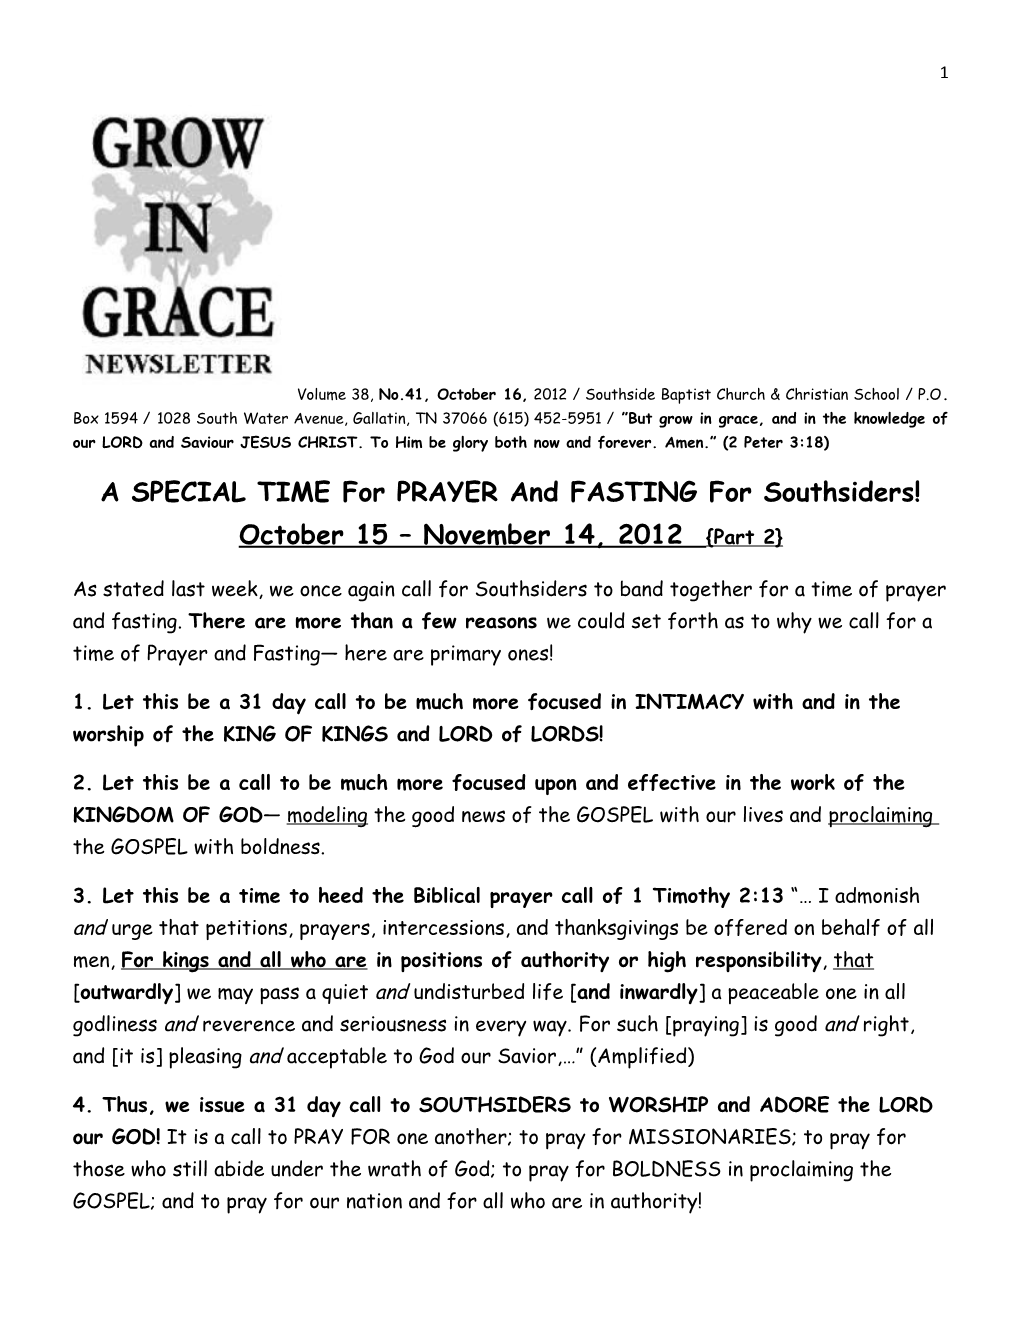 A SPECIAL TIME for PRAYER and FASTING for Southsiders! October 15 November 14, 2012 Part 2